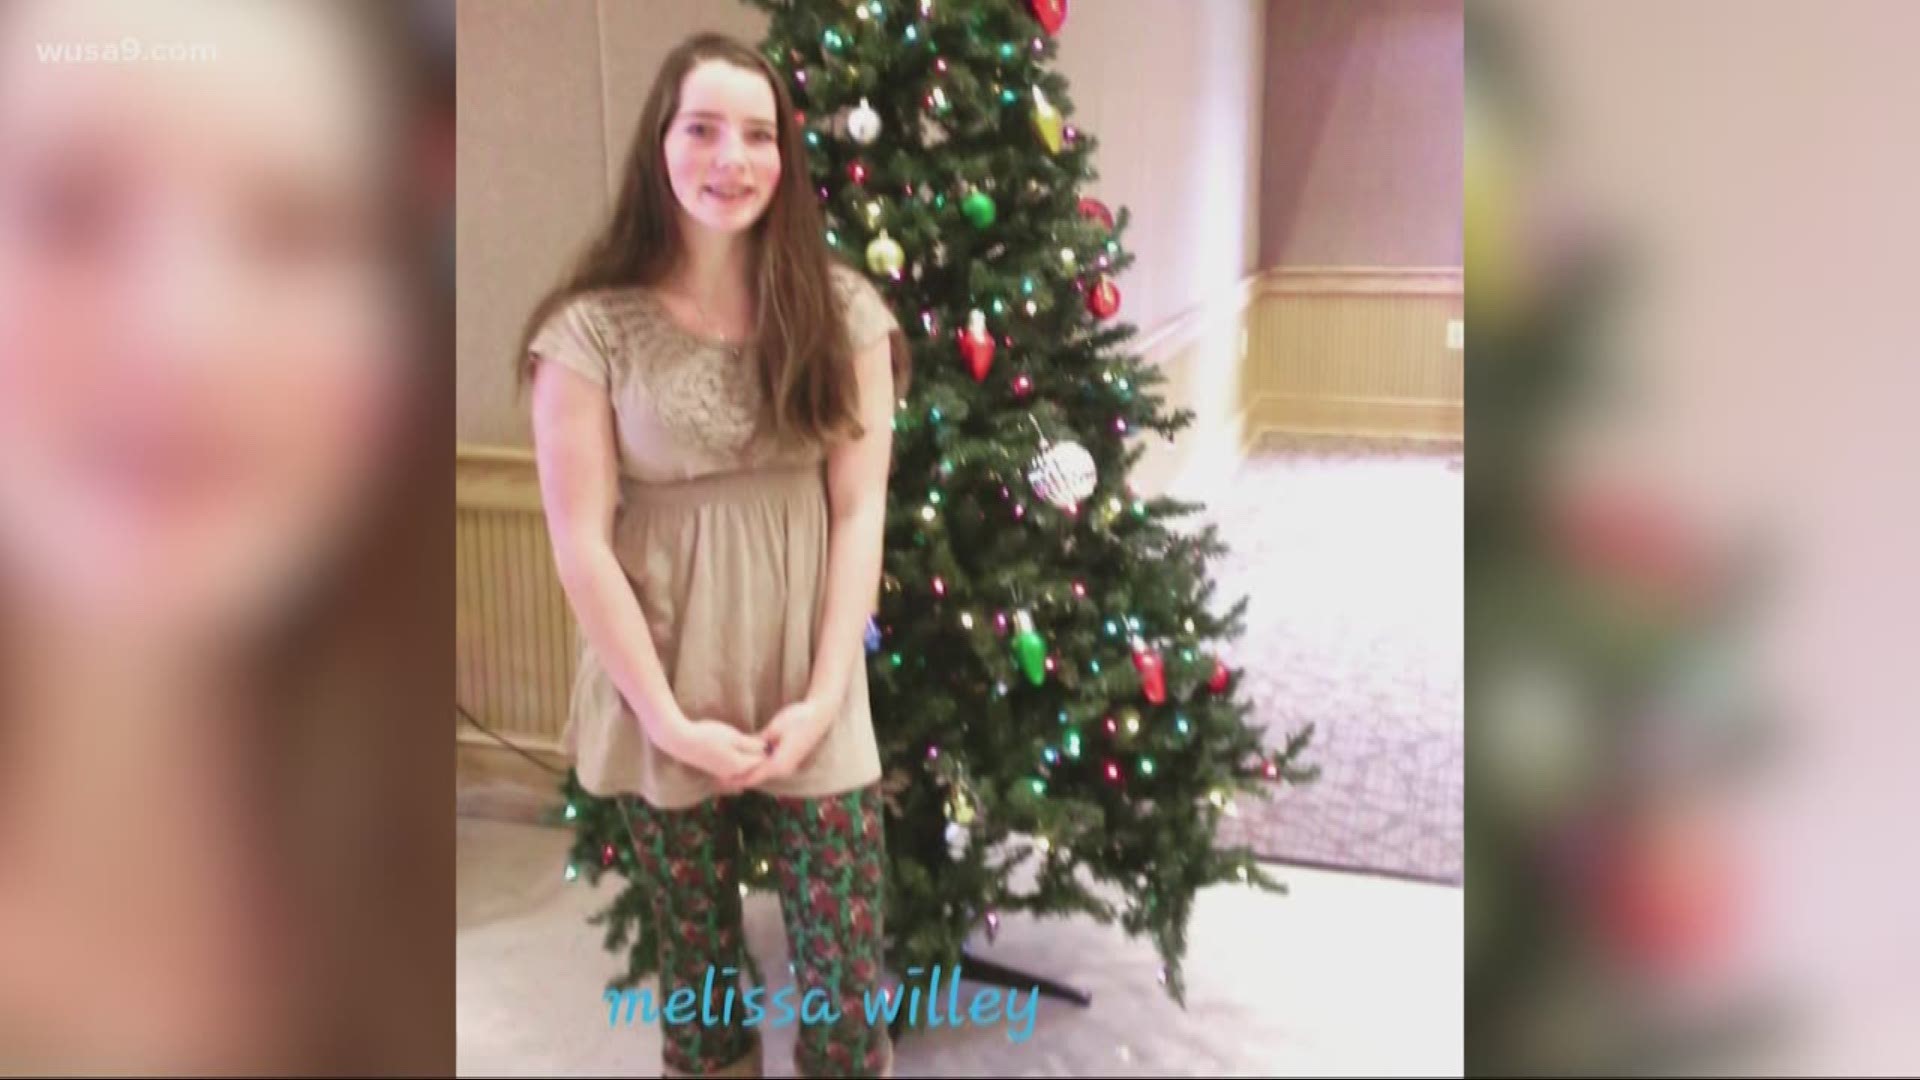 Wednesday will mark one year since the fatal shooting at Great Mills High School in St. Mary’s County. One year ago, on March 20,  a gunman shot and killed Jaelynn Willey, a loving 16-year-old honor student and star swimmer, in the hallway of her high school.